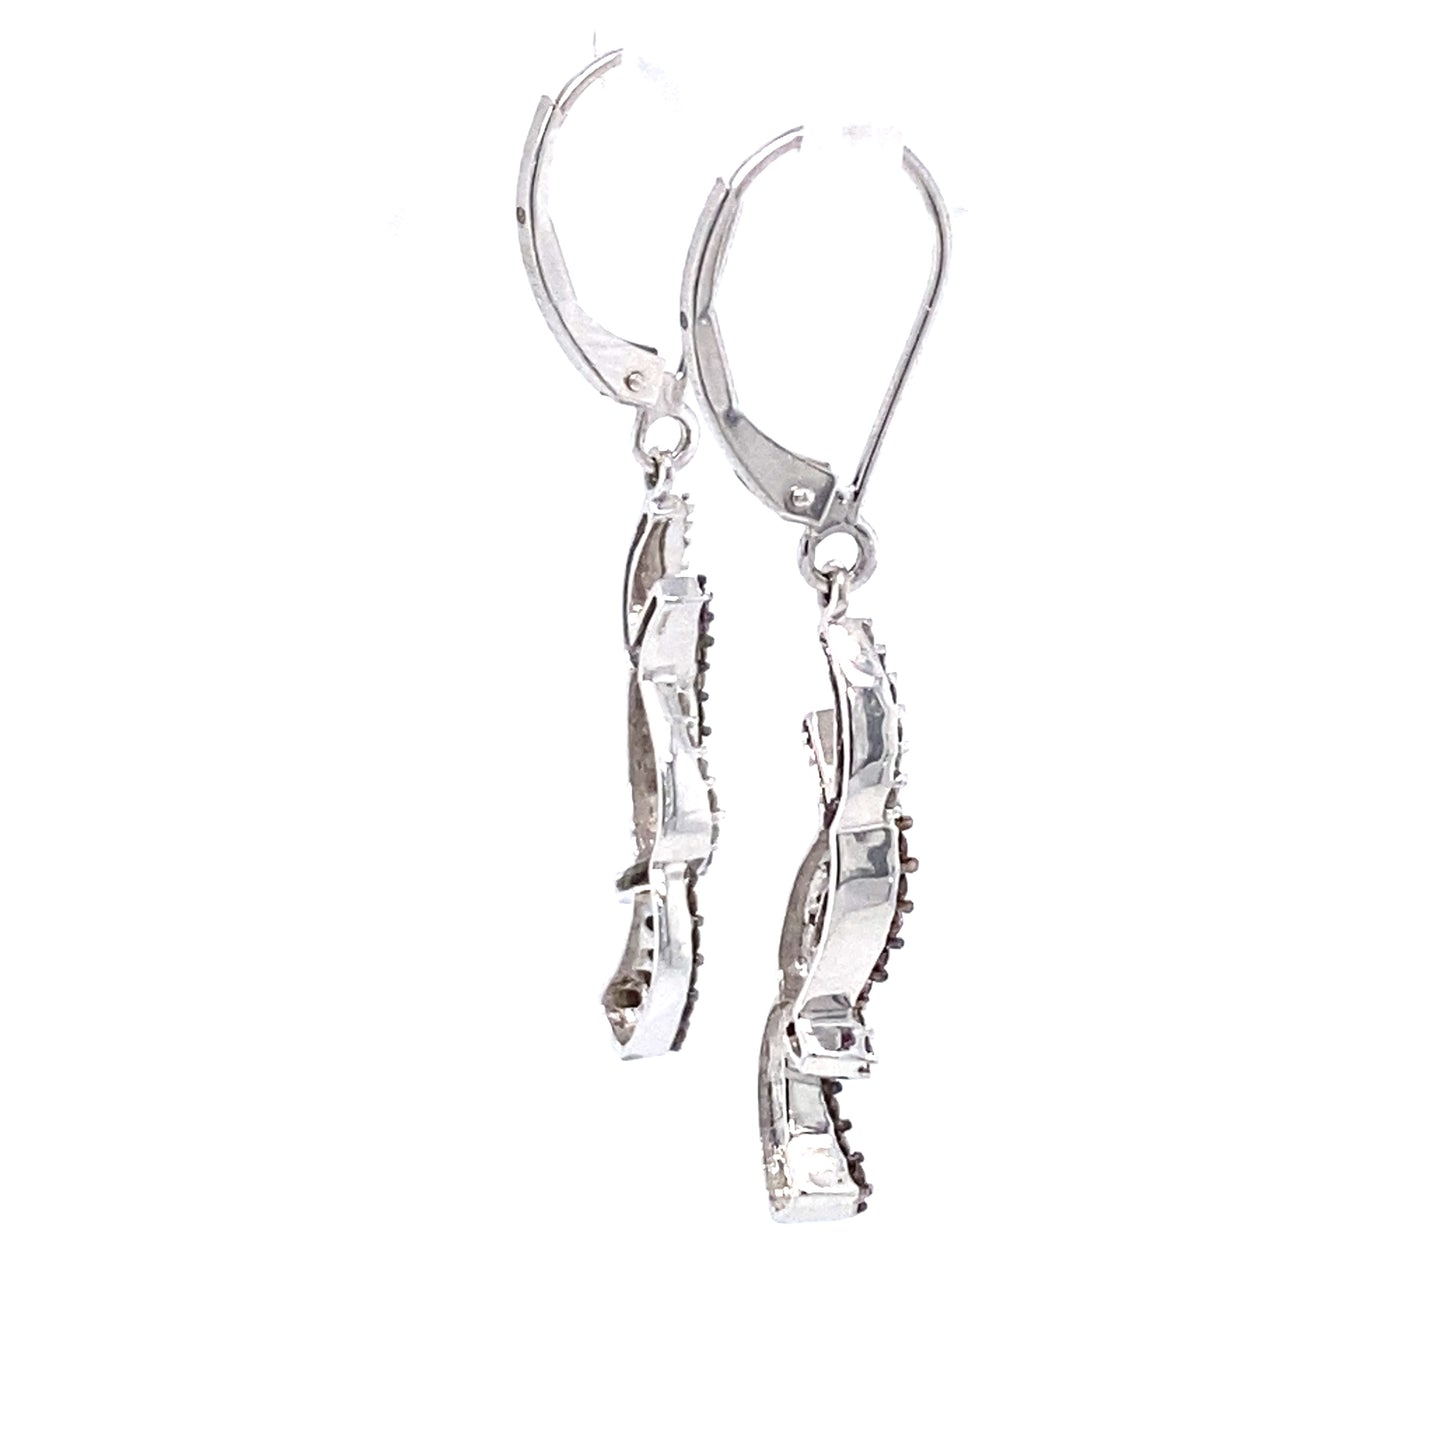 Circa 1980 Brown and White Diamond Twist Chandelier Earrings in 14K White Gold